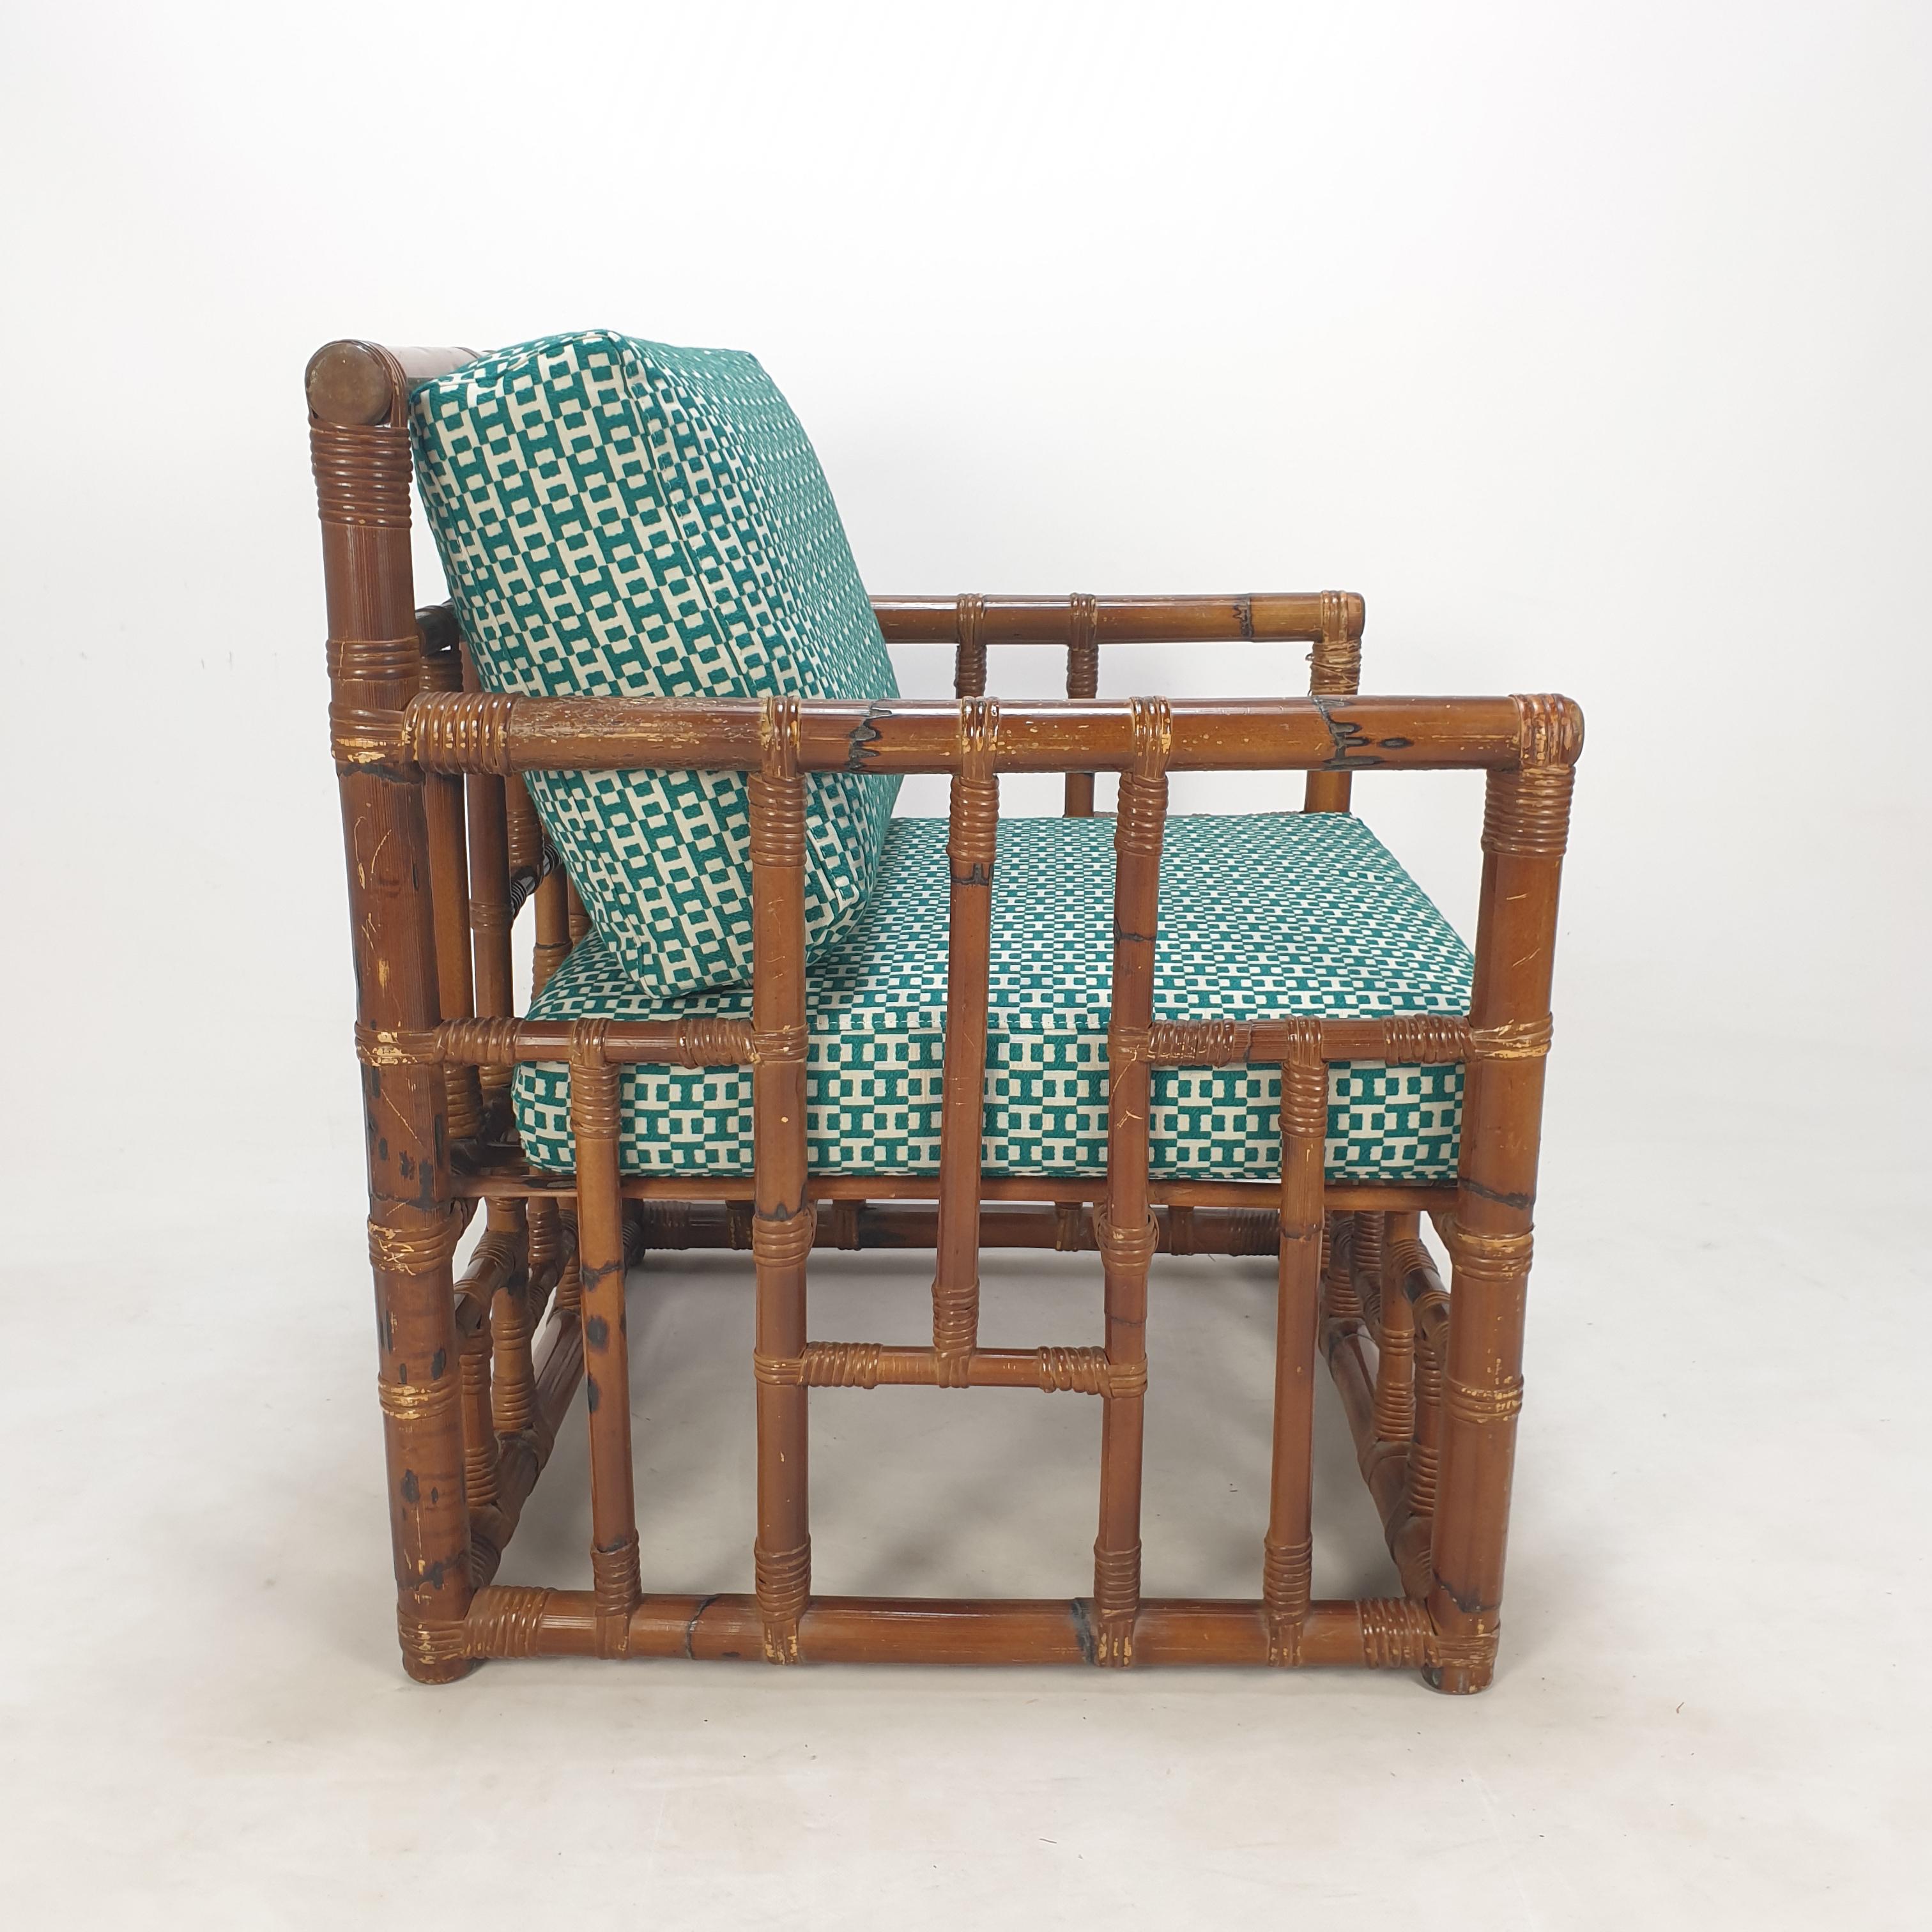 Pair of Italian Bamboo Lounge Chairs with Hermès Upholstery, 1970's For Sale 2